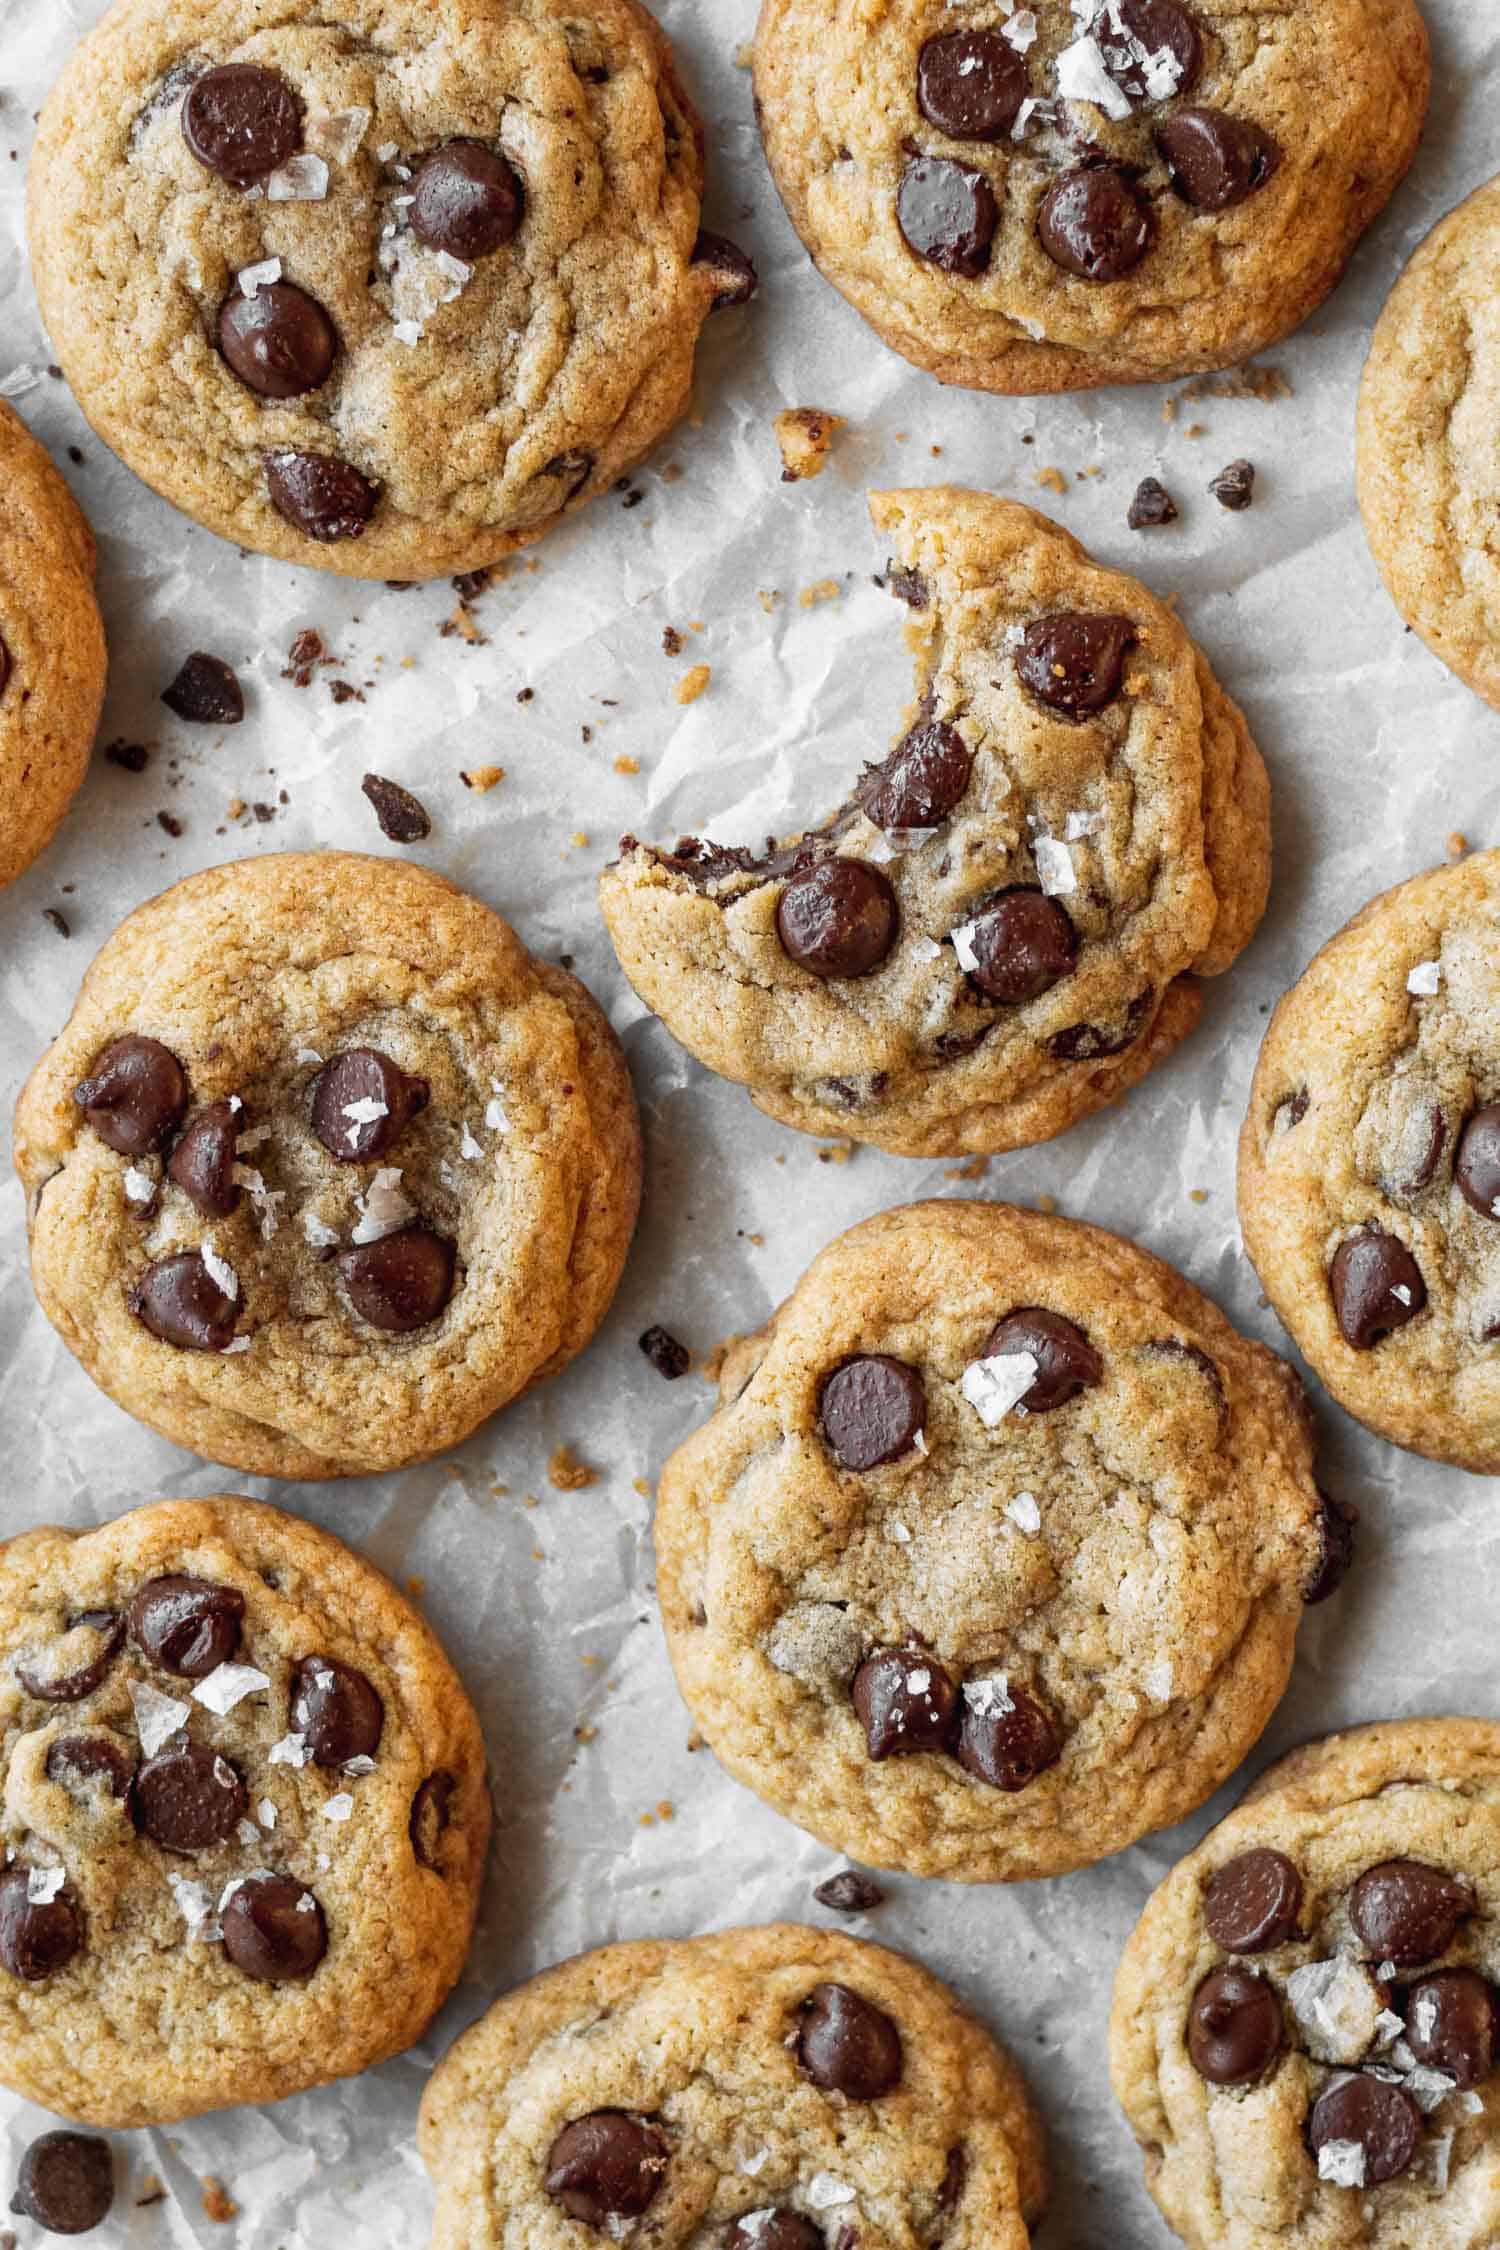 Gluten free and dairy free chocolate chip cookies